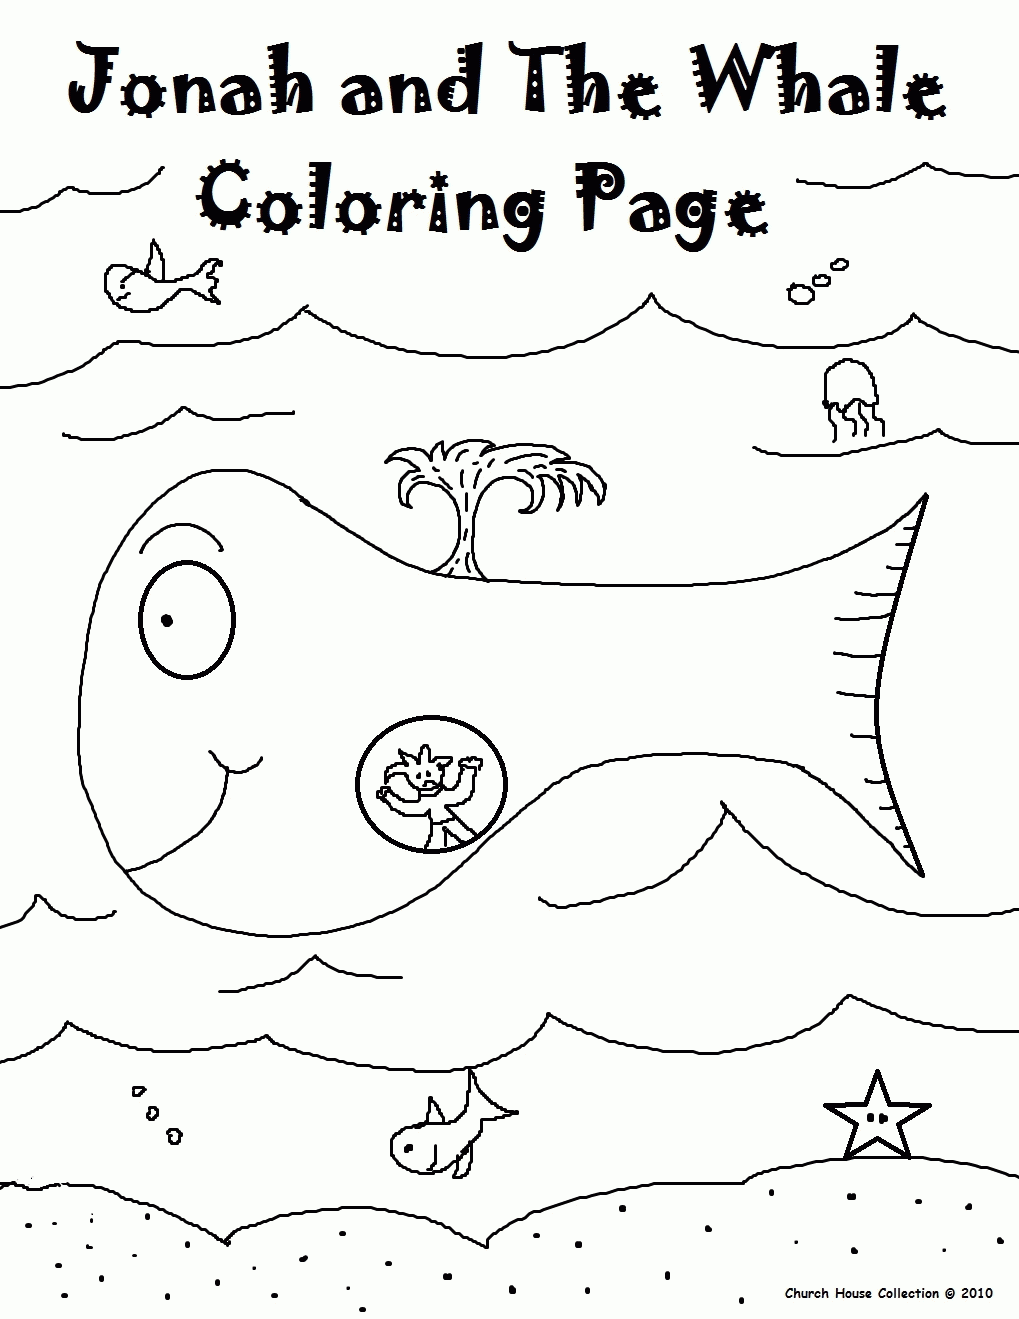 Brilliance Free Coloring Pages Of Jonah And The Whale - Widetheme